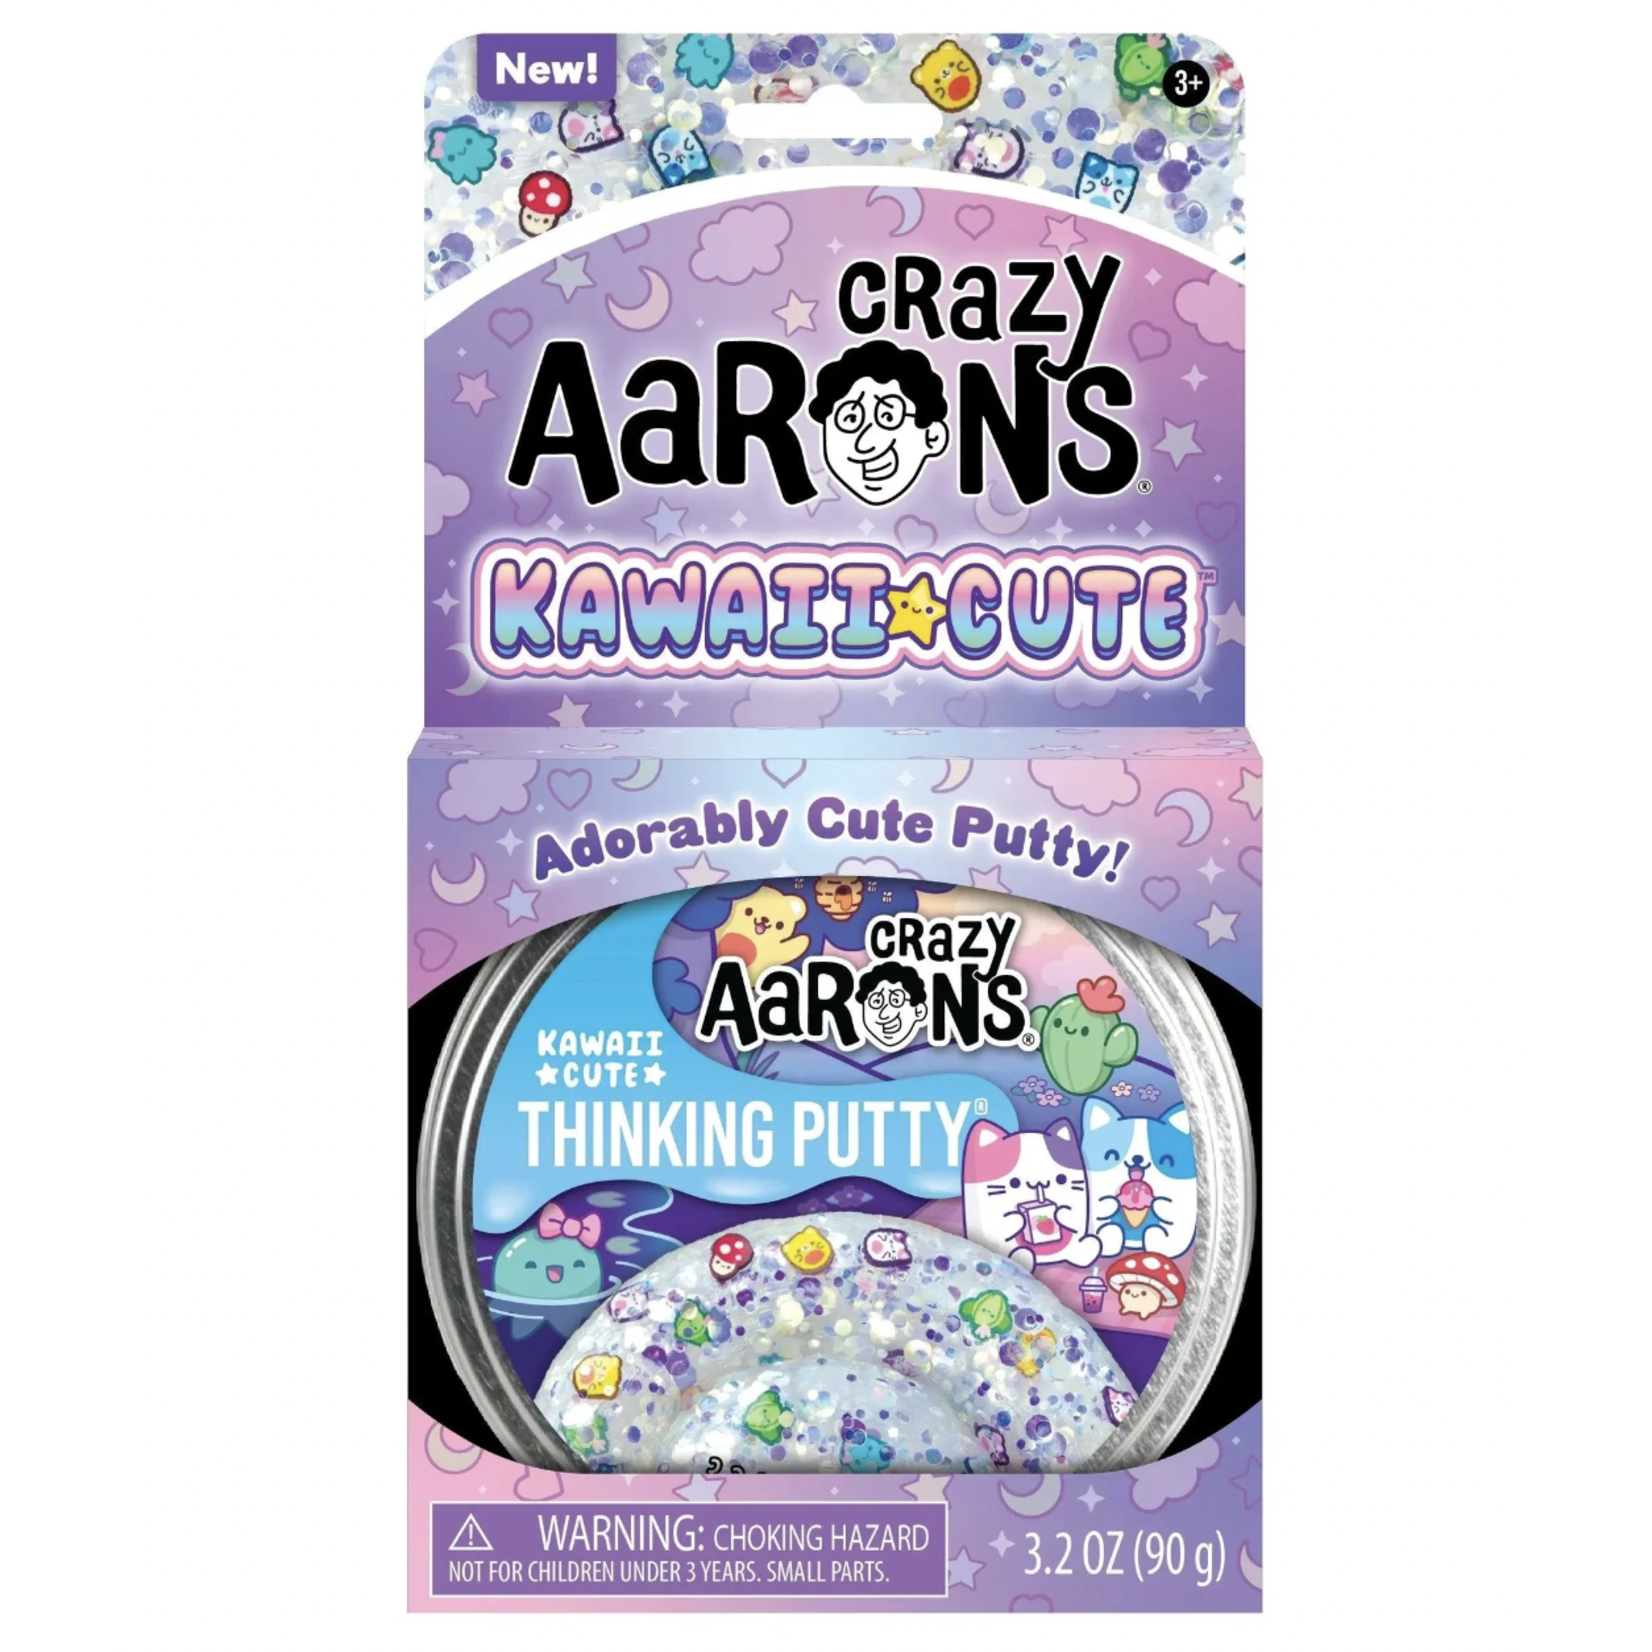 Crazy Aarons TRENDSETTER - KAWAII CUTE THINKING PUTTY 4IN